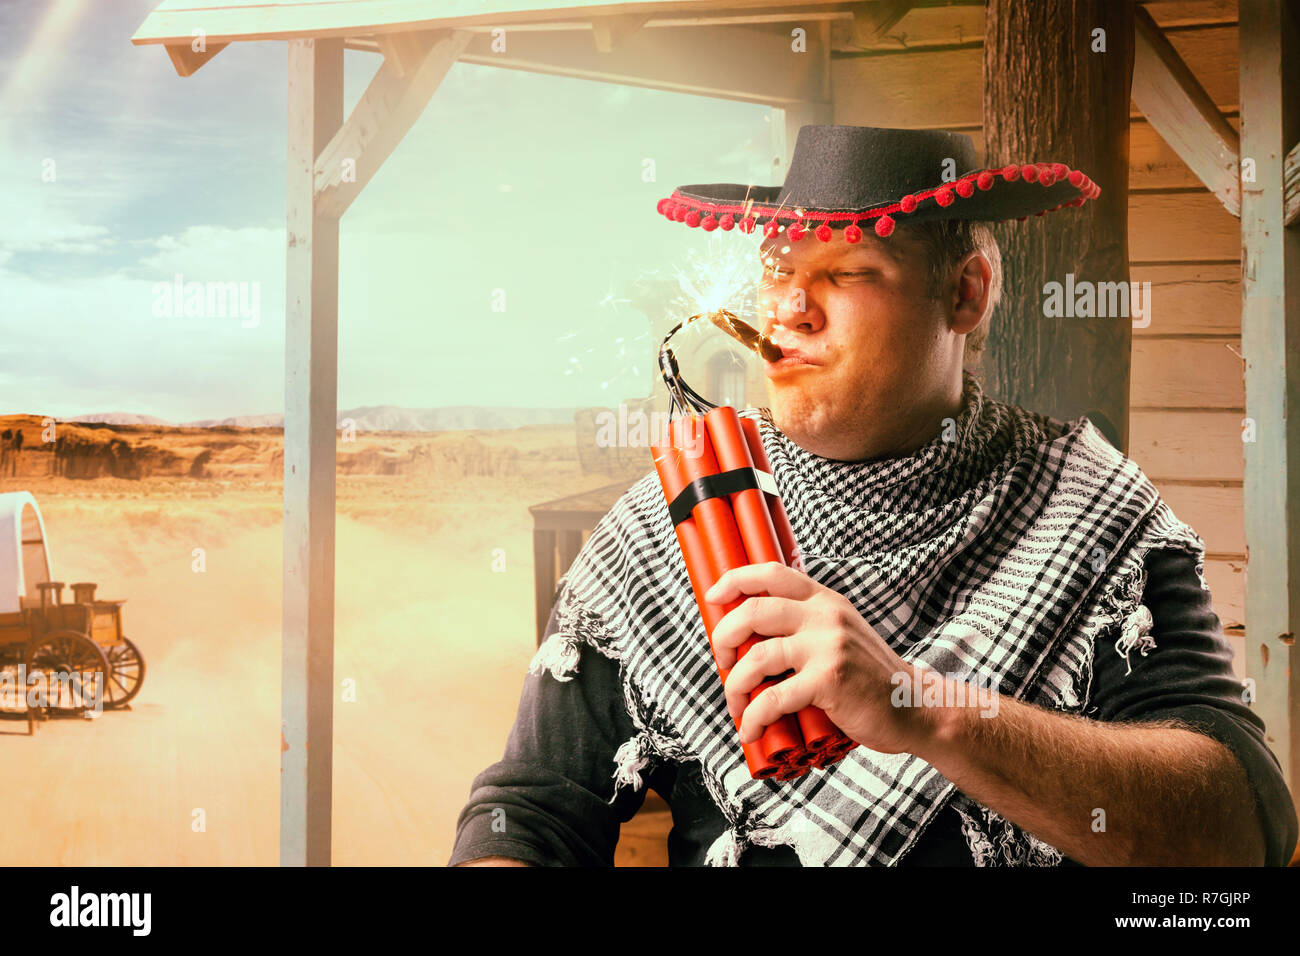 Fearless Cowboy Lights A Cigar From A Stick Of Dynamite Harsh Wild West Adventure In Western Country Stock Photo Alamy